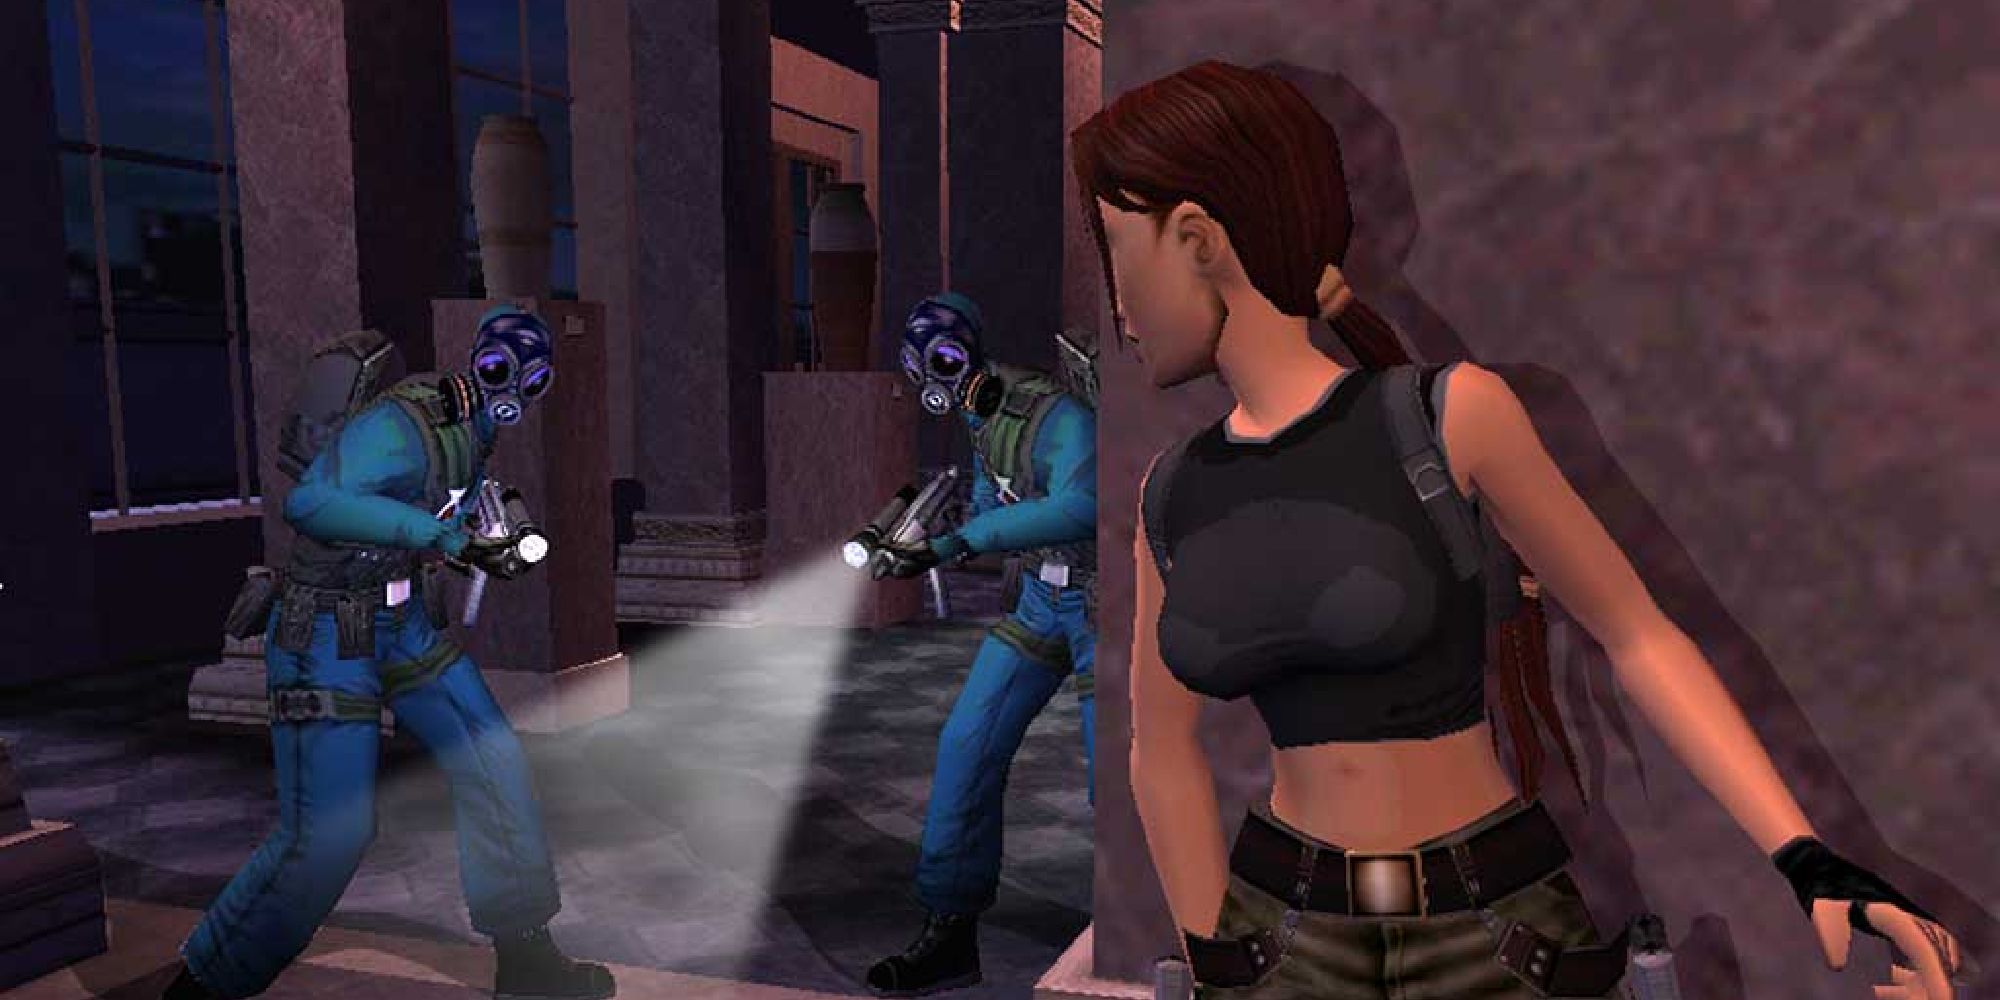 Lara sneaking past two soldiers in ski-masks in Angel of Darkness